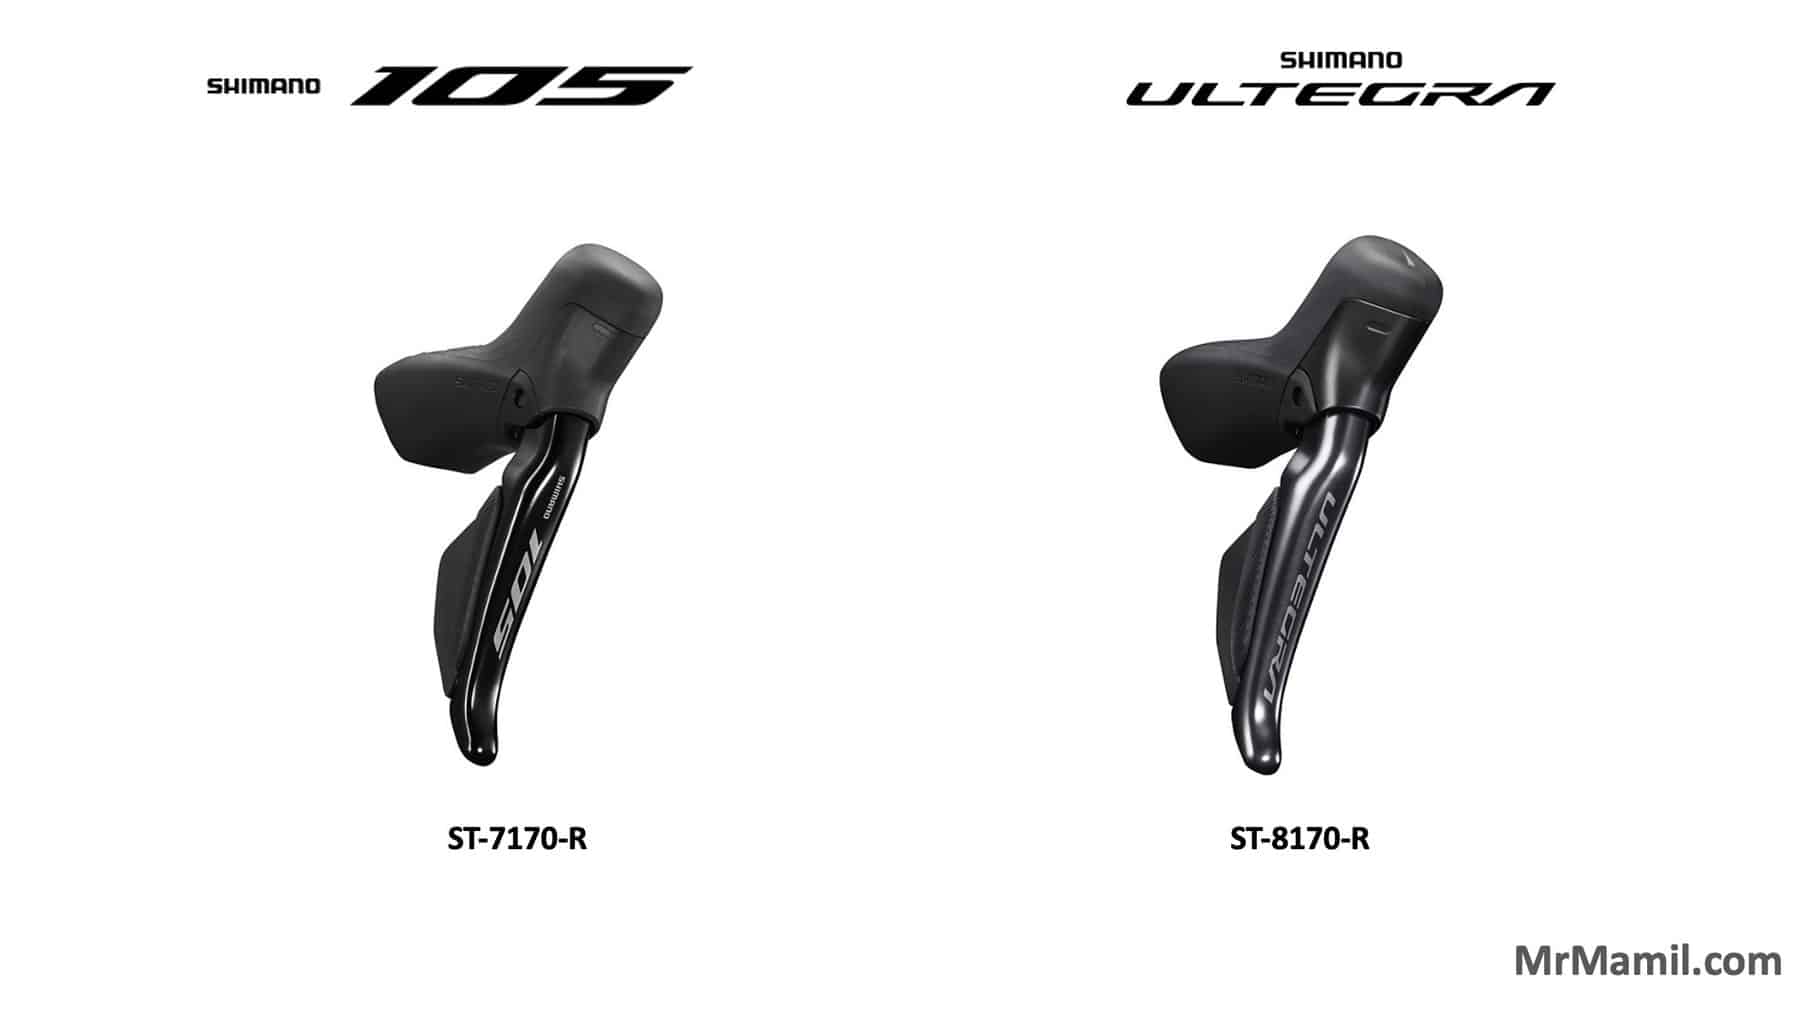 Side-by-side comparison of Shimano bicycle shifters. On the left, a Shimano 105 Di2 shifter labeled ST-7170-R. On the right, a Shimano Ultegra Di2 shifter labeled ST-8170-R.